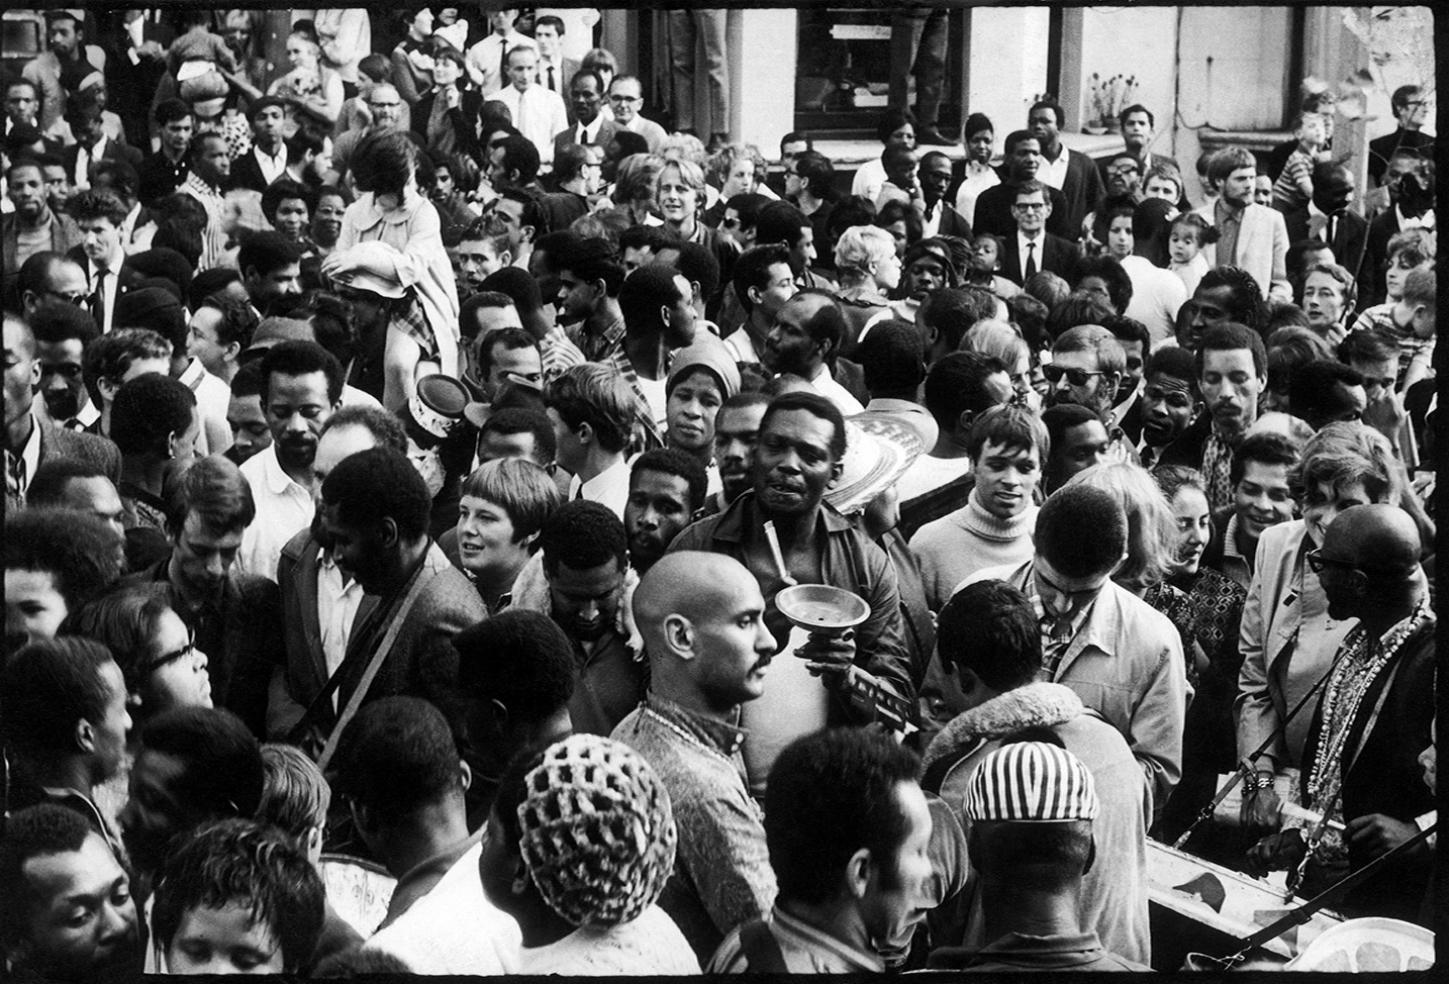 Notting Hill Carnival 1968, Photograph: Charlie Phillips